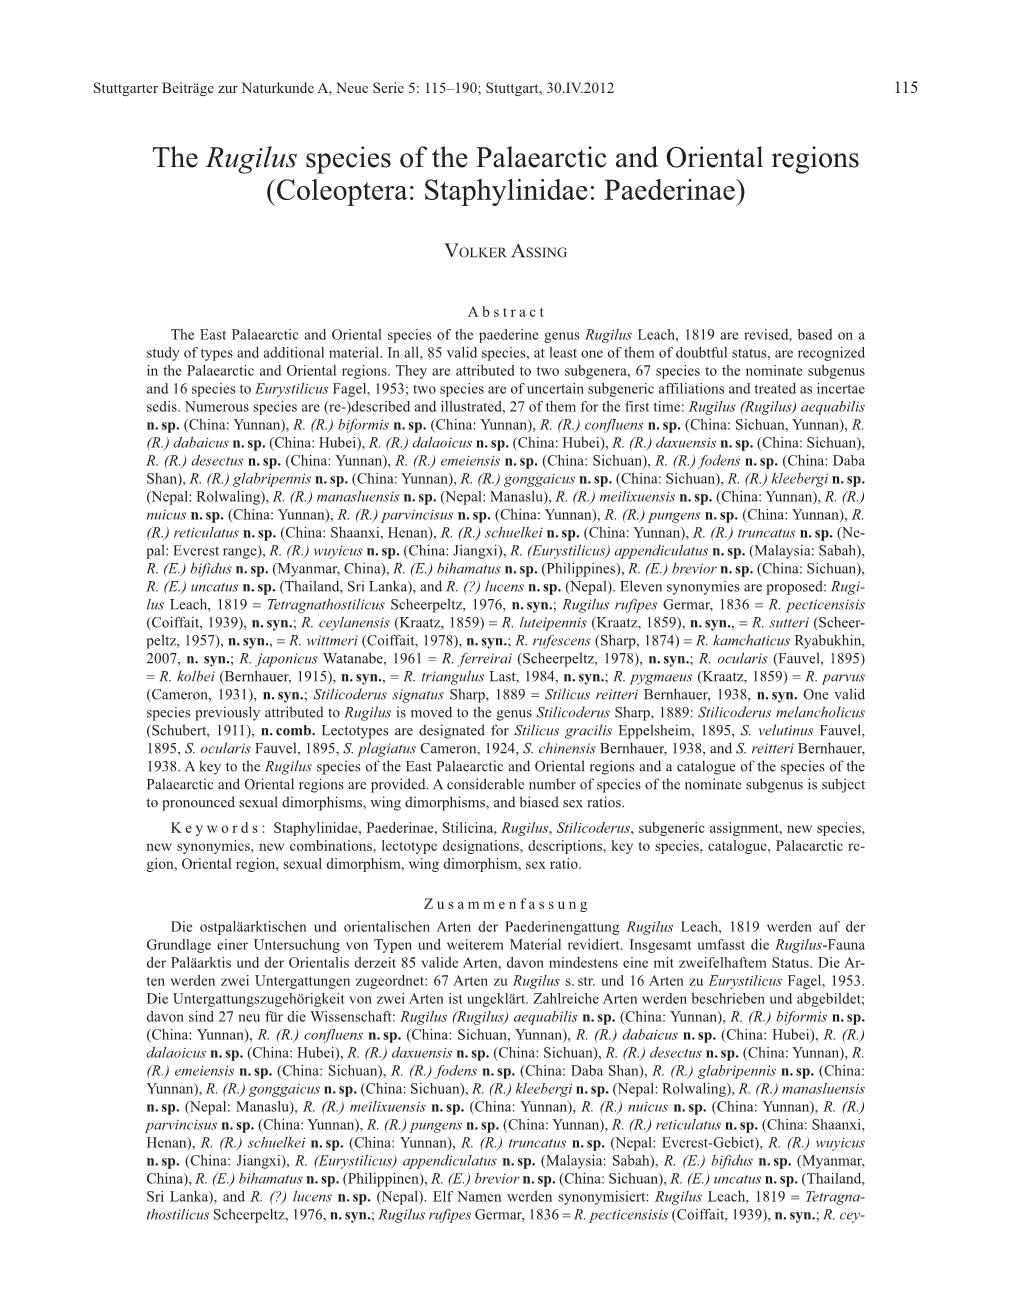 The Rugilus Species of the Palaearctic and Oriental Regions (Coleoptera: Staphylinidae: Paederinae)